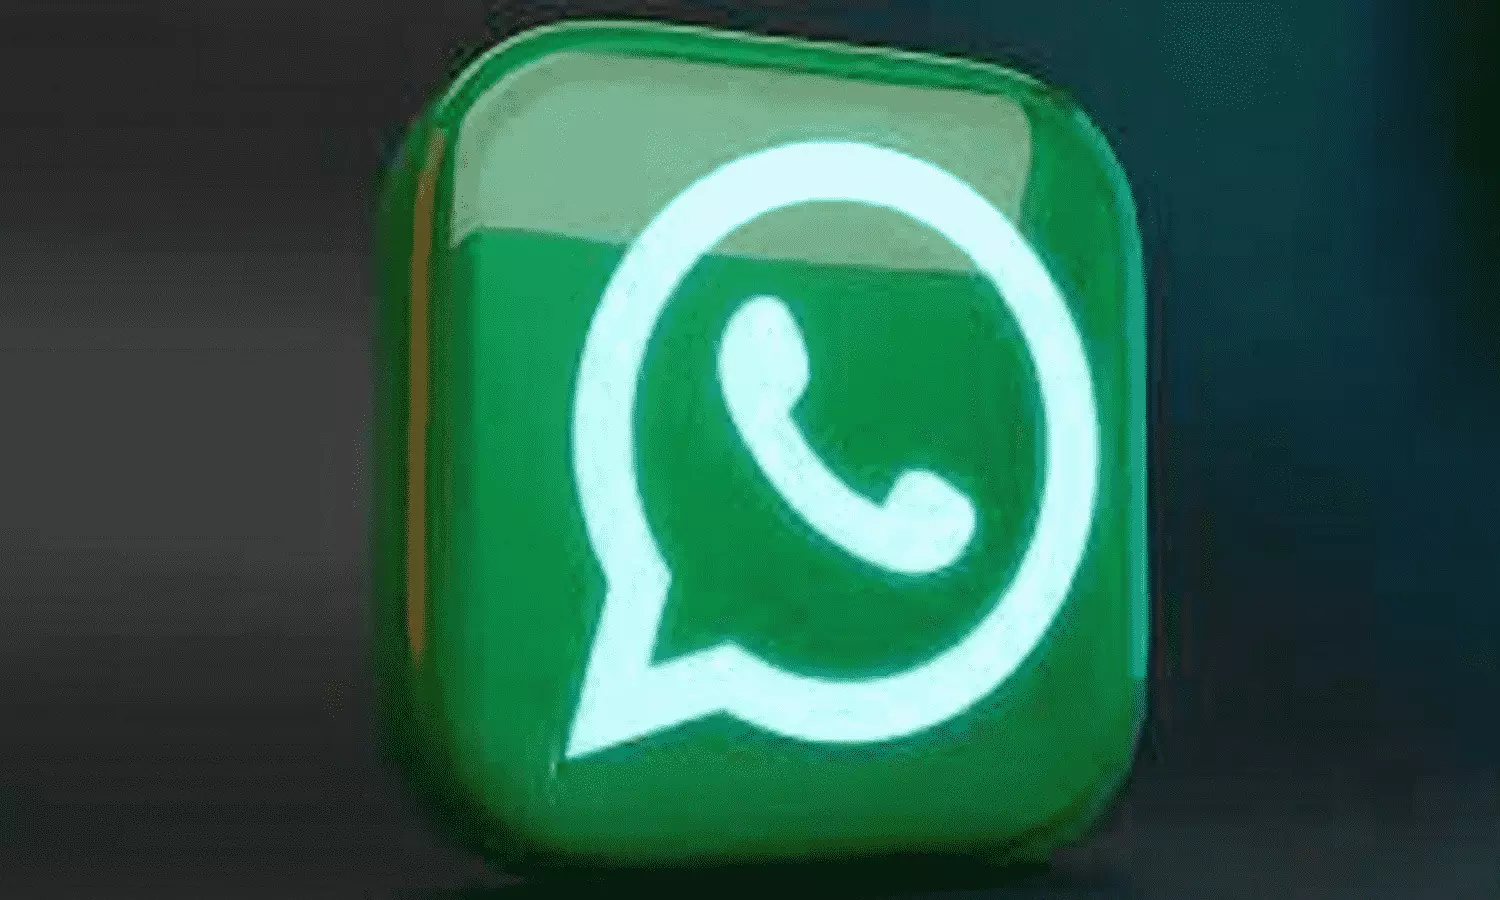 Whatsapp New Features